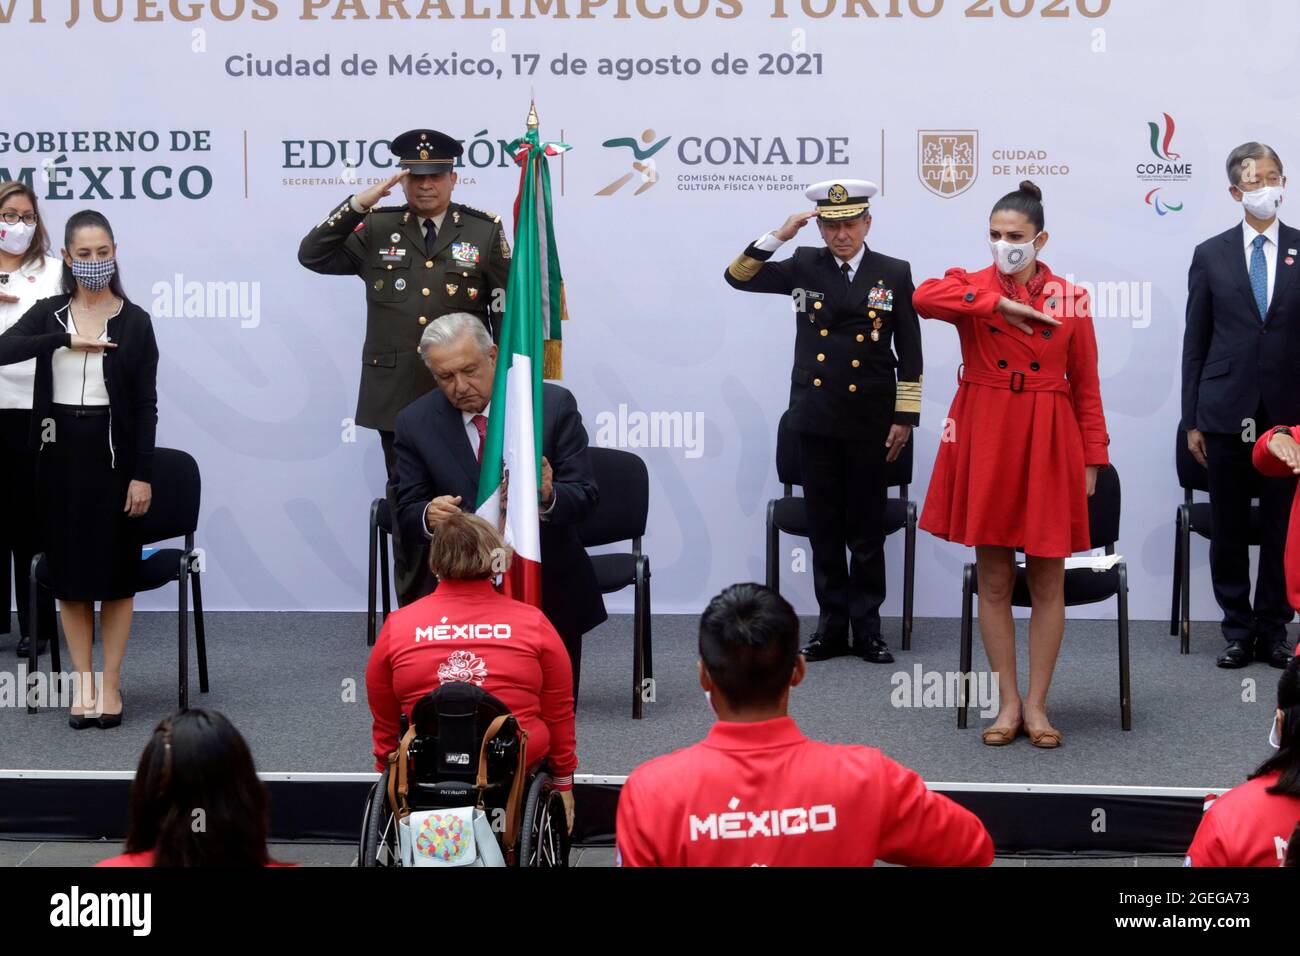 MEXICO CITY, MEXICO - AUGUST 17: Mexican President Andres Manuel Lopez Obrador, holds the nation's flag, accompanied by Mexico City Mayor Claudia Sheinbaum, Director of the National Commission for Physical Culture and Sport Ana Gabriela Guevara and ambassador of Japan in Mexico, Yasushi Takase during  a ceremony   with Mexico's athletes heading to the Tokyo 2020 Paralympic Games at National Palace on August 17, 2021 in Mexico City, Mexico. Credit: Luis Barron/Eyepix Group/The Photo Access Stock Photo